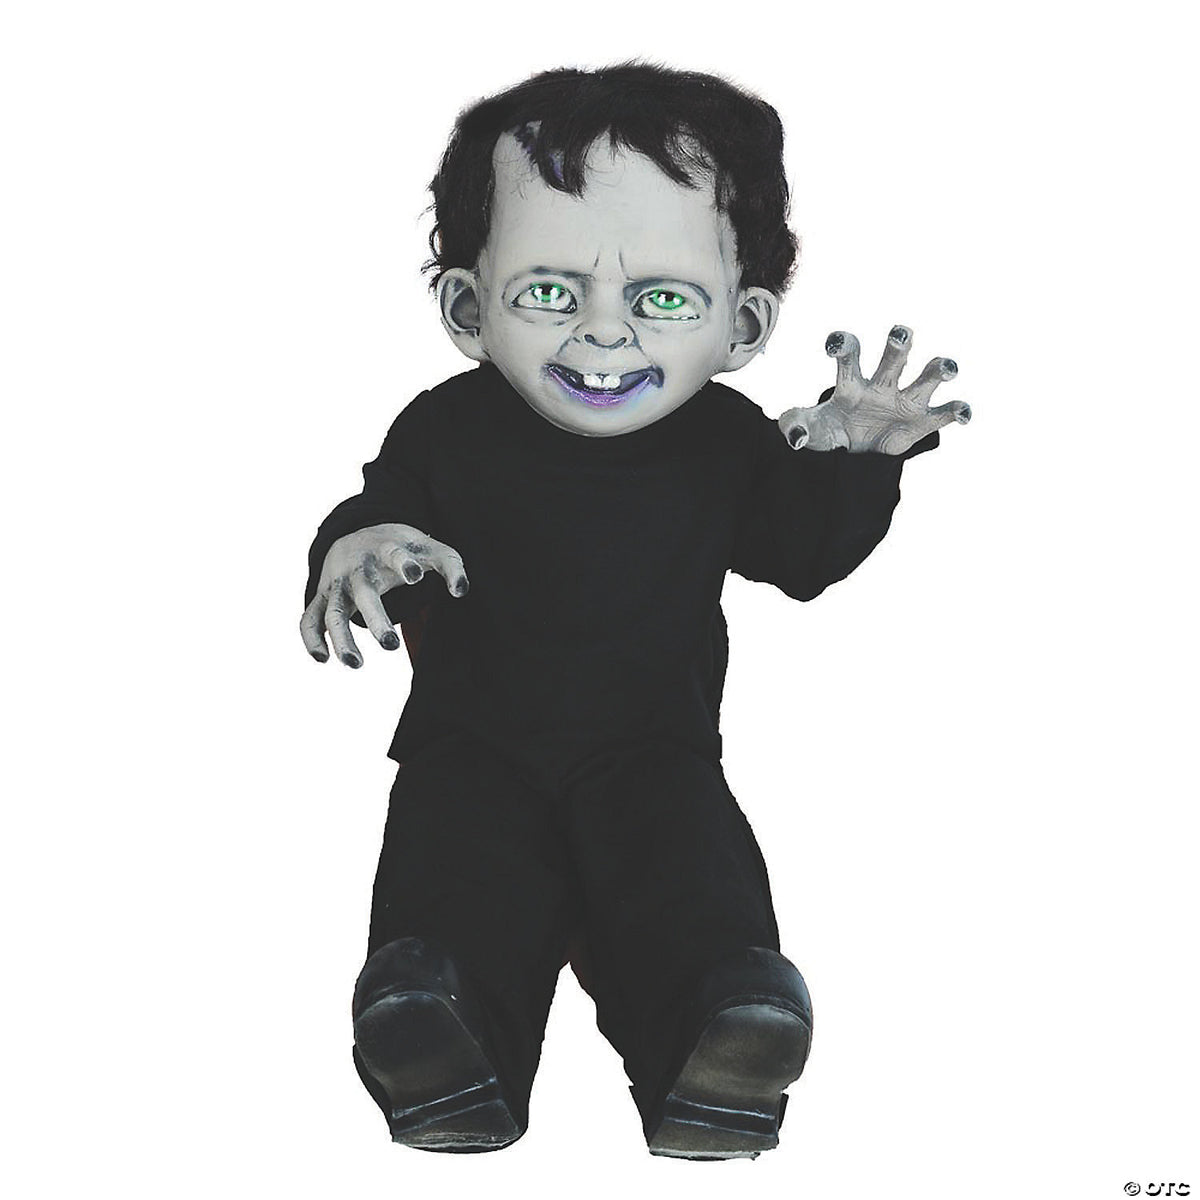 Frankie Monster Kid Posable Prop Doll